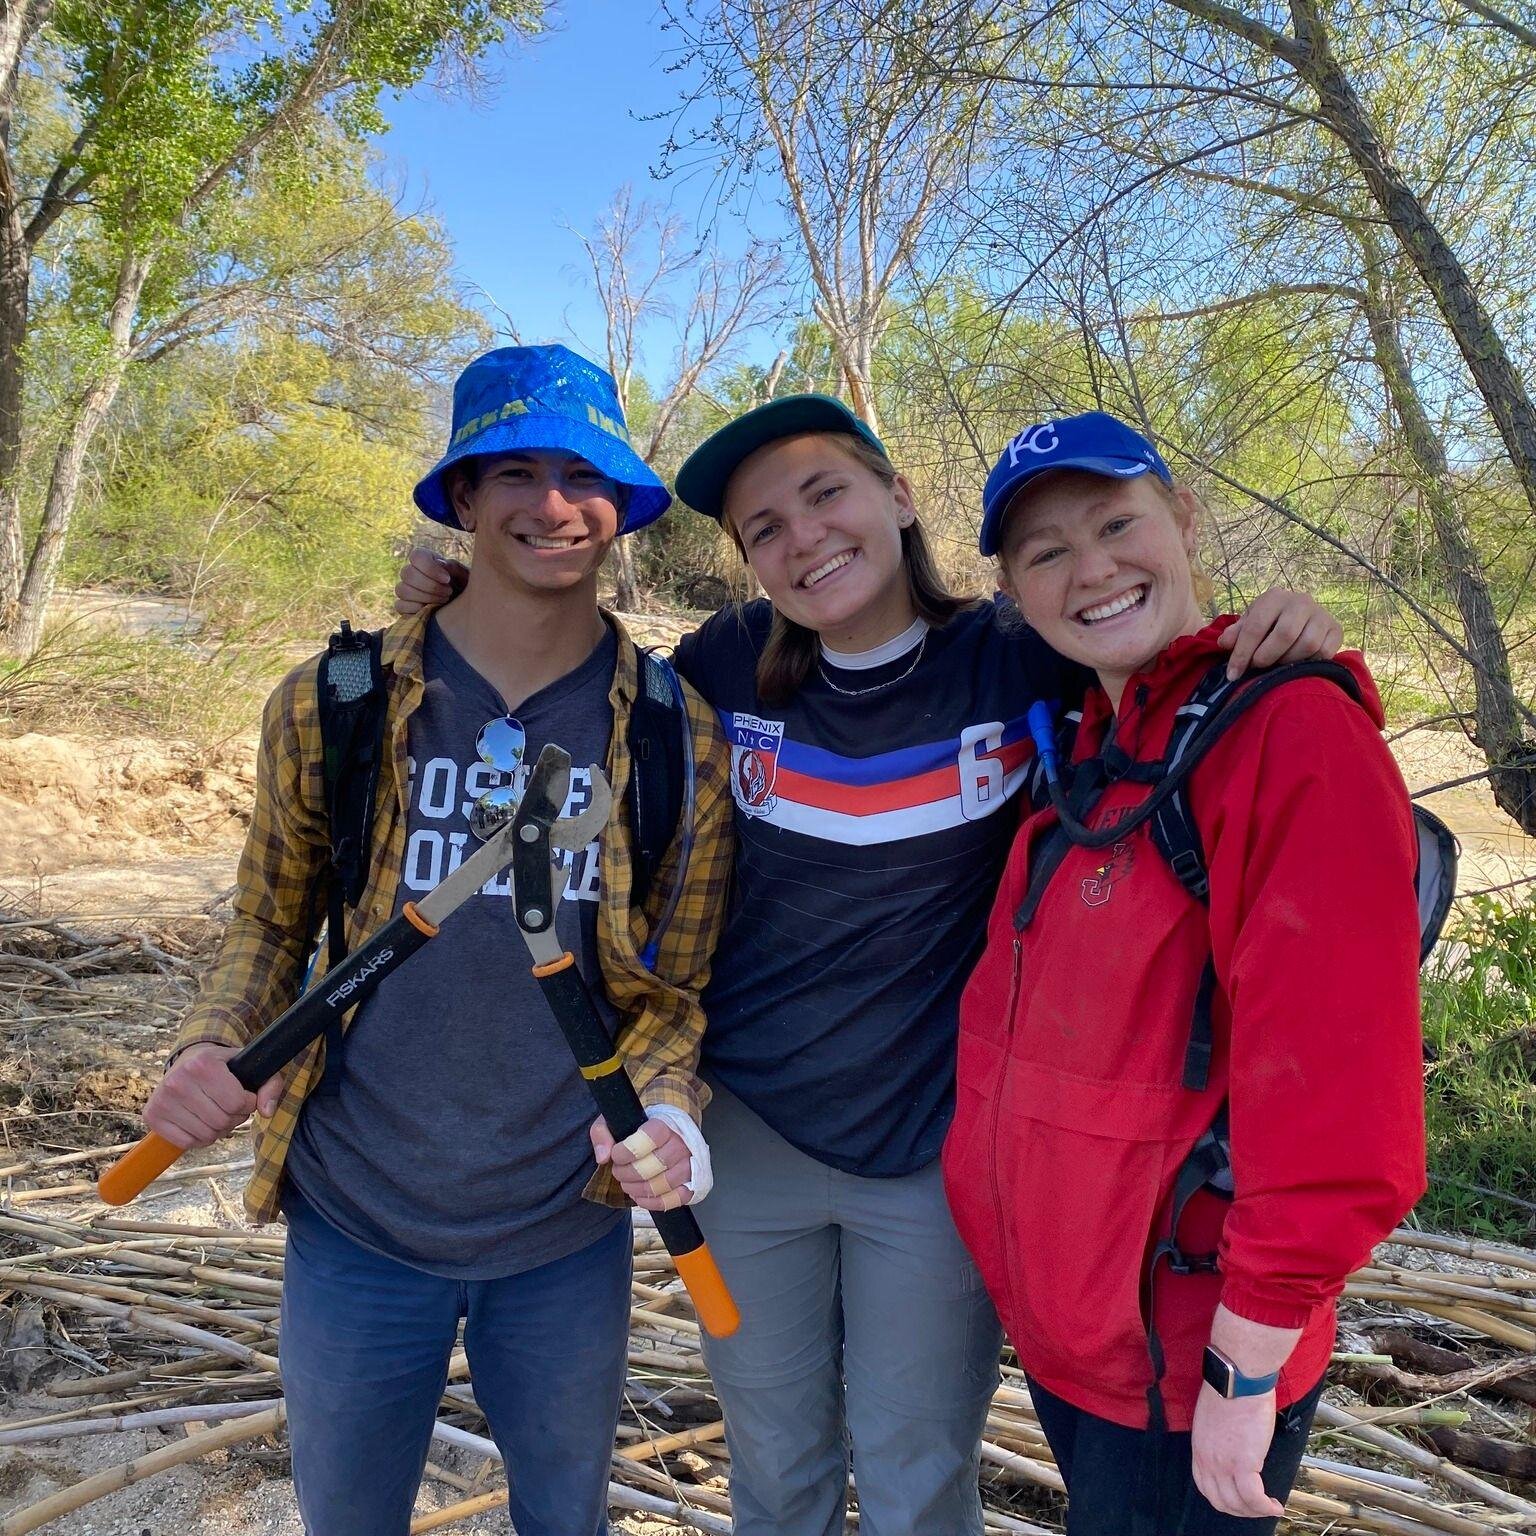 Recent work and recent fun! The weather has started to shift here in Tucson and the water is rapidly disappearing from our &quot;rivers.&quot; Before it got too hot we were able to visit the Tanque Verde Wash to see the beautiful flow while helping t